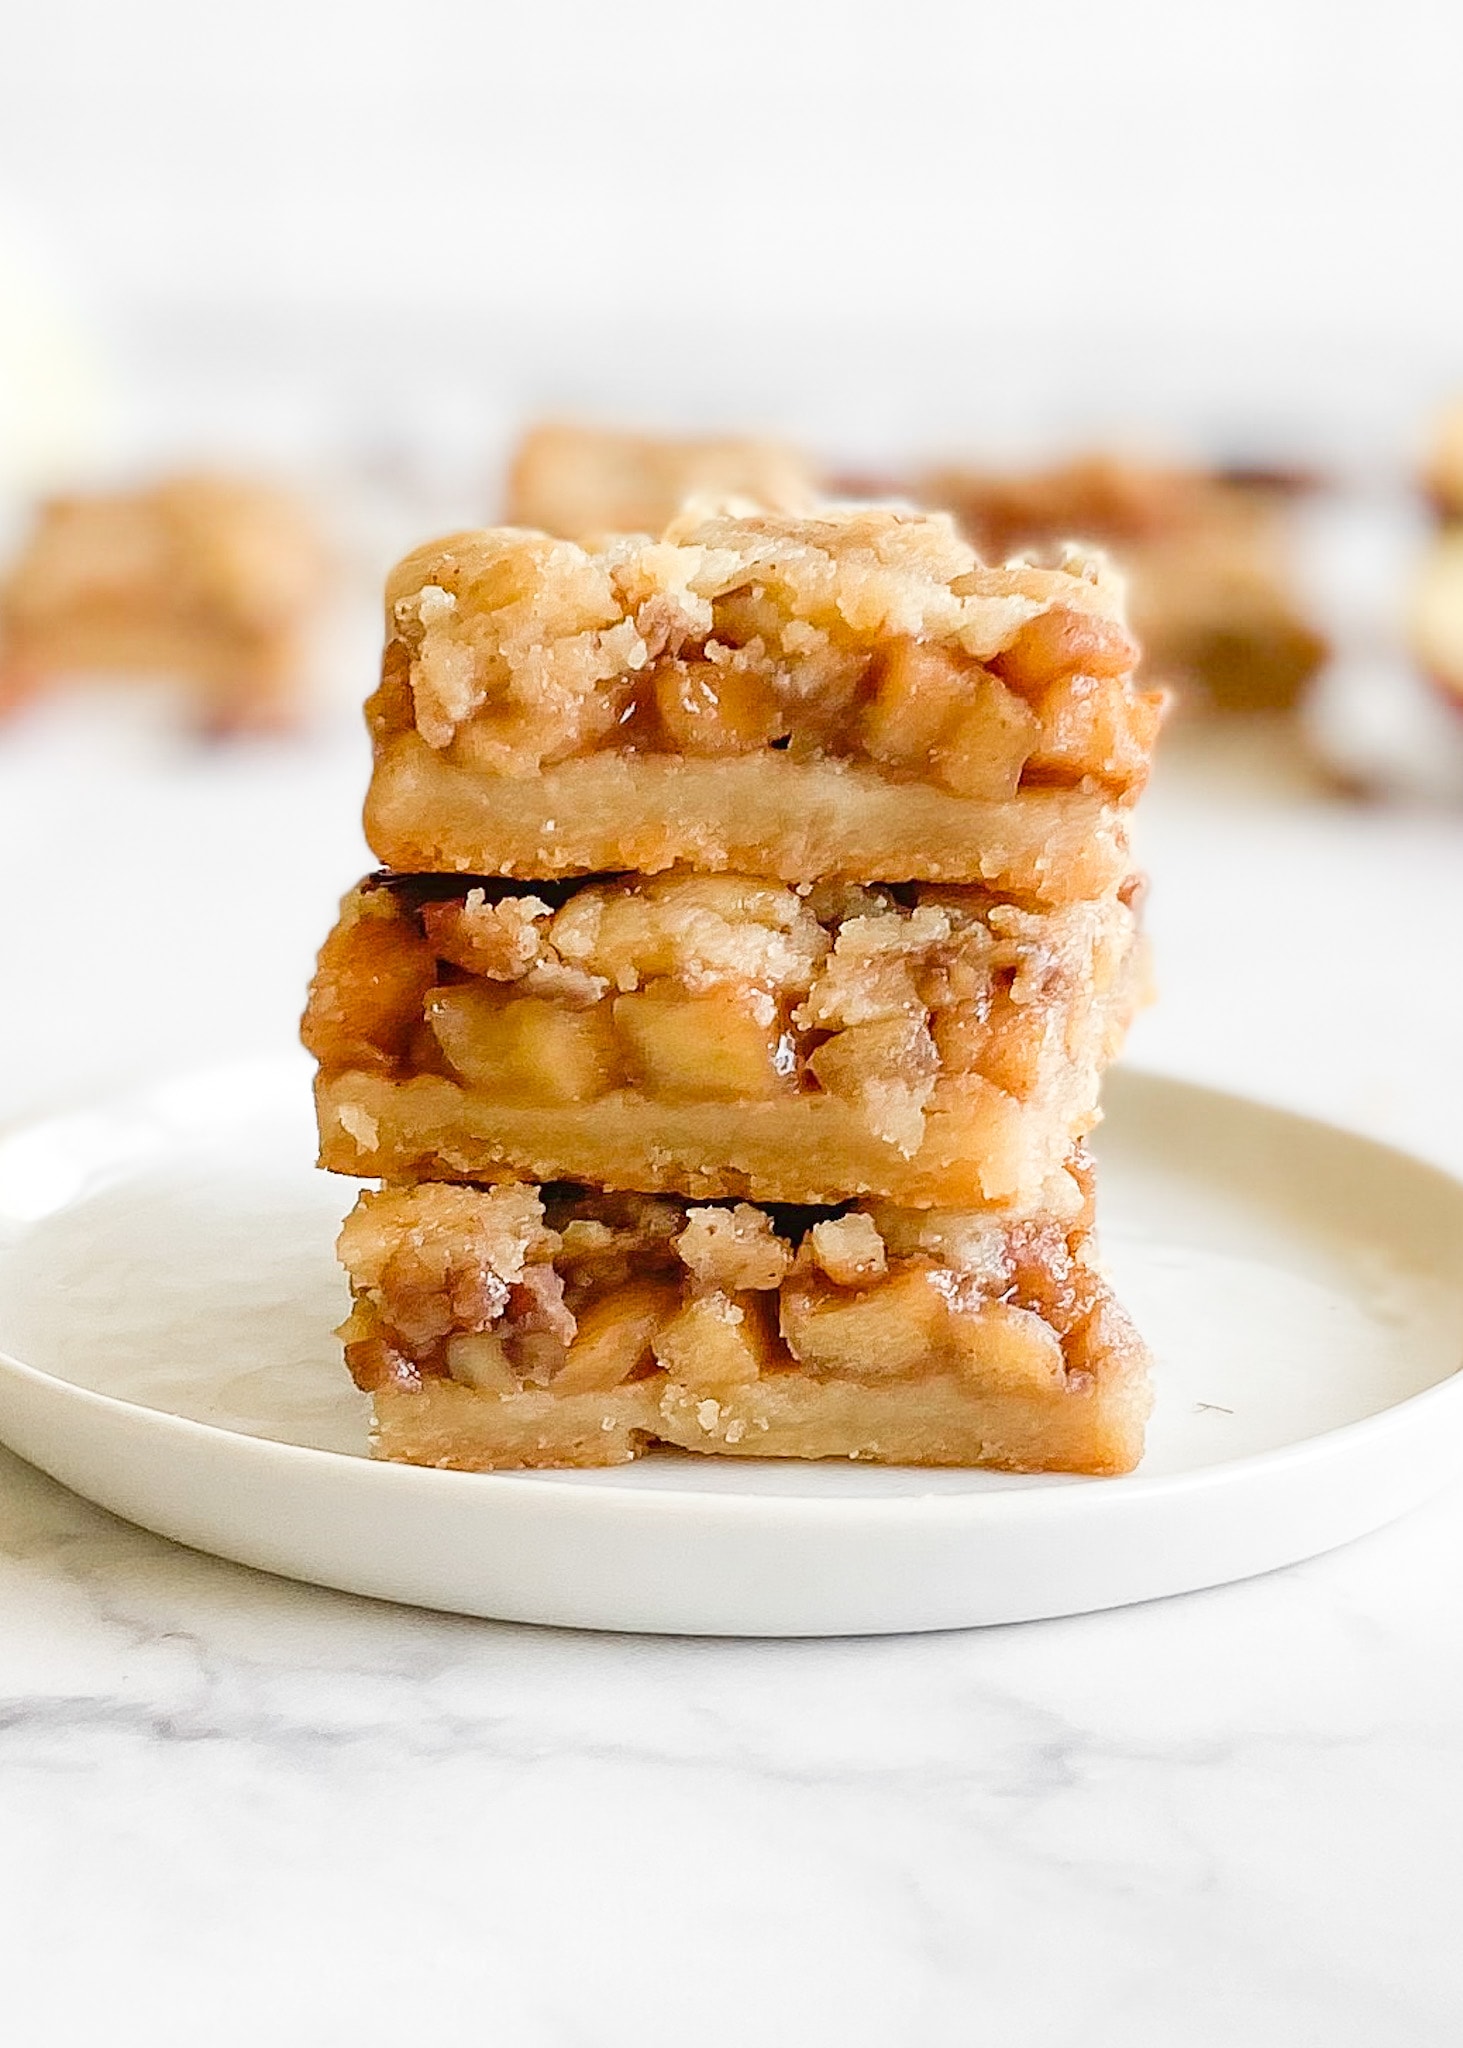 Three apple crumble bars stacked on top of each other. Large chunks of apples are layered in the bar.